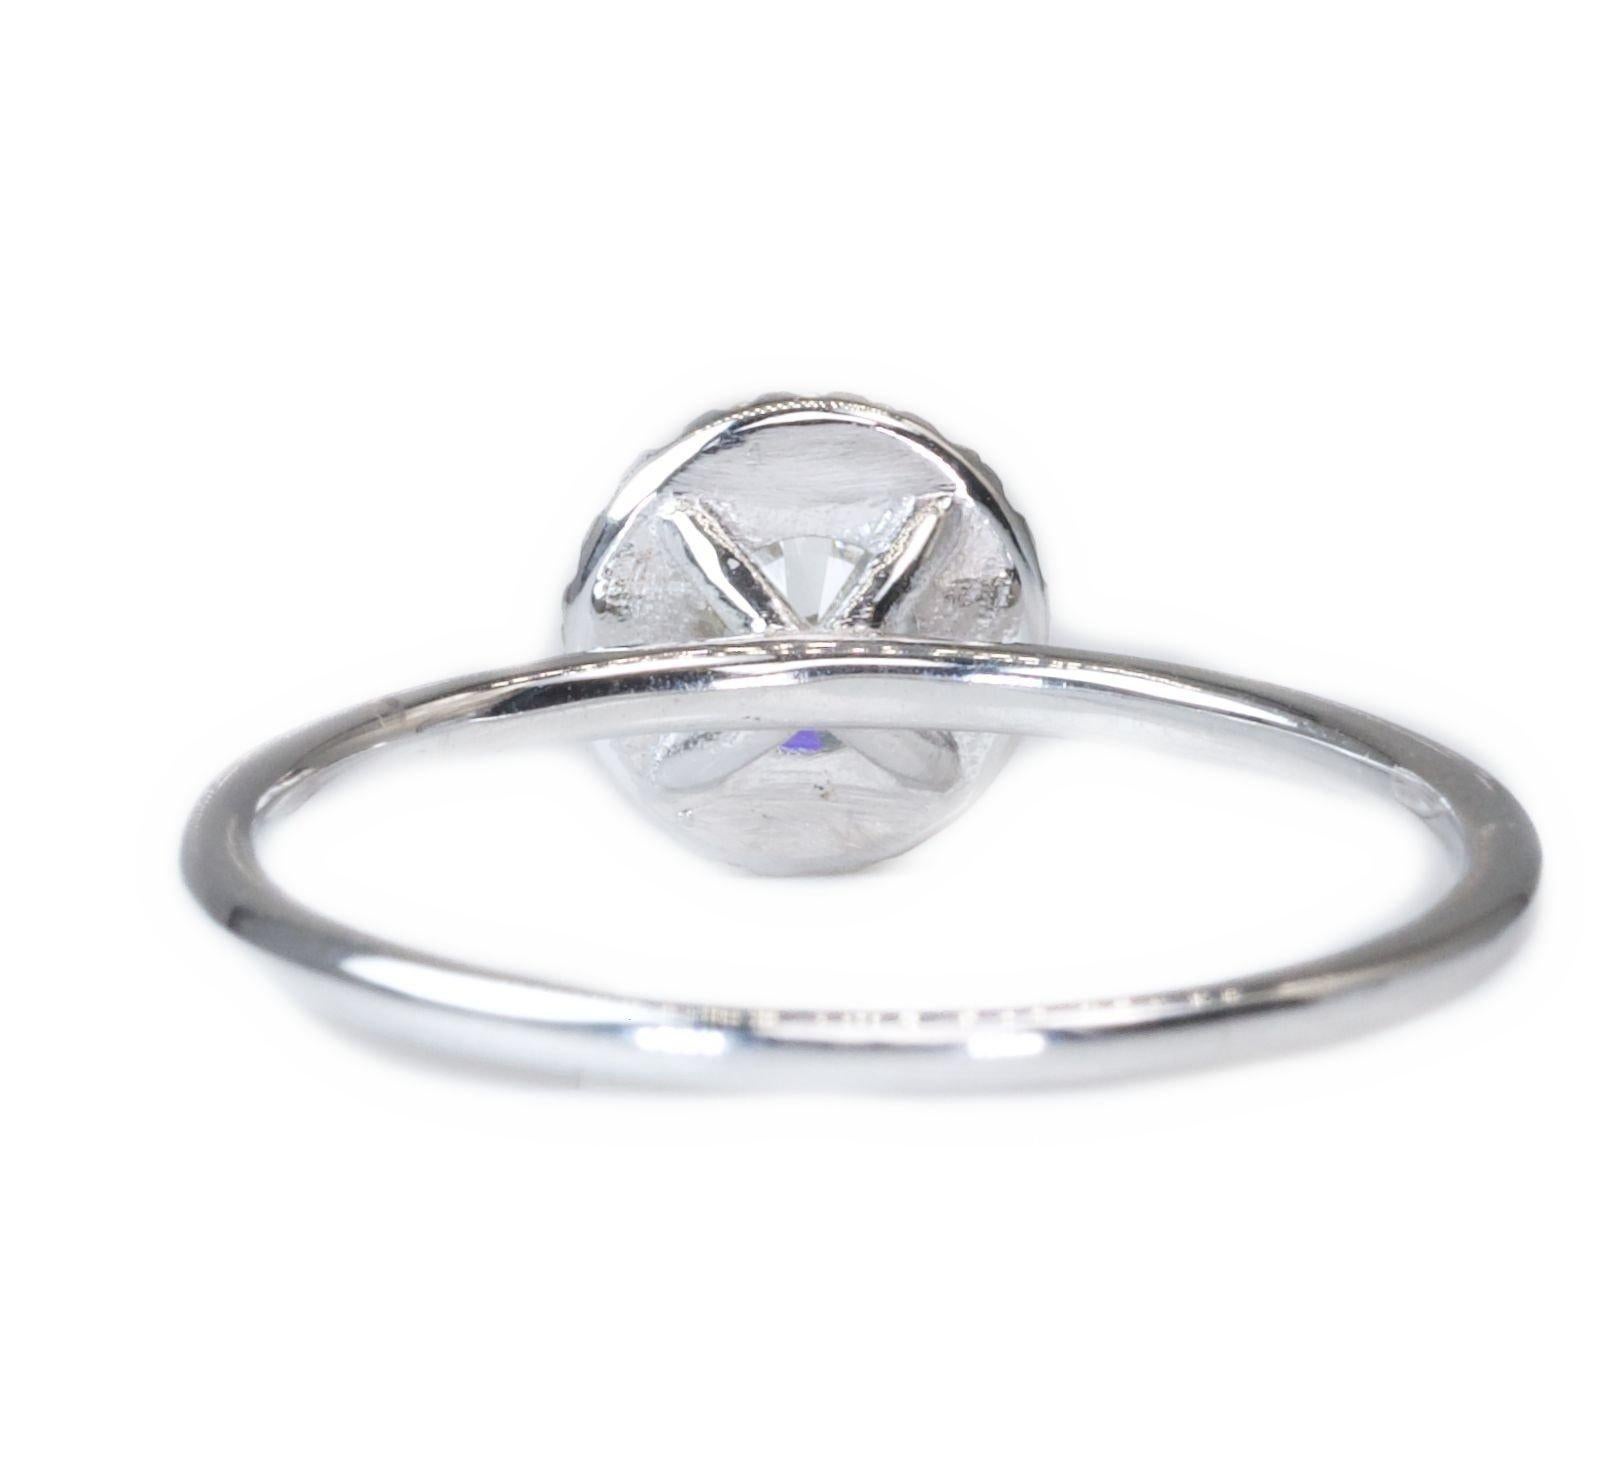 A beautiful halo solitaire ring with a dazzling 0.65 carat round brilliant natural diamond in H VS1 with ideal cut. This ring also has 0.30 carats of side stone diamonds, which adds more to its elegance. The setting is made of 18K white gold with a